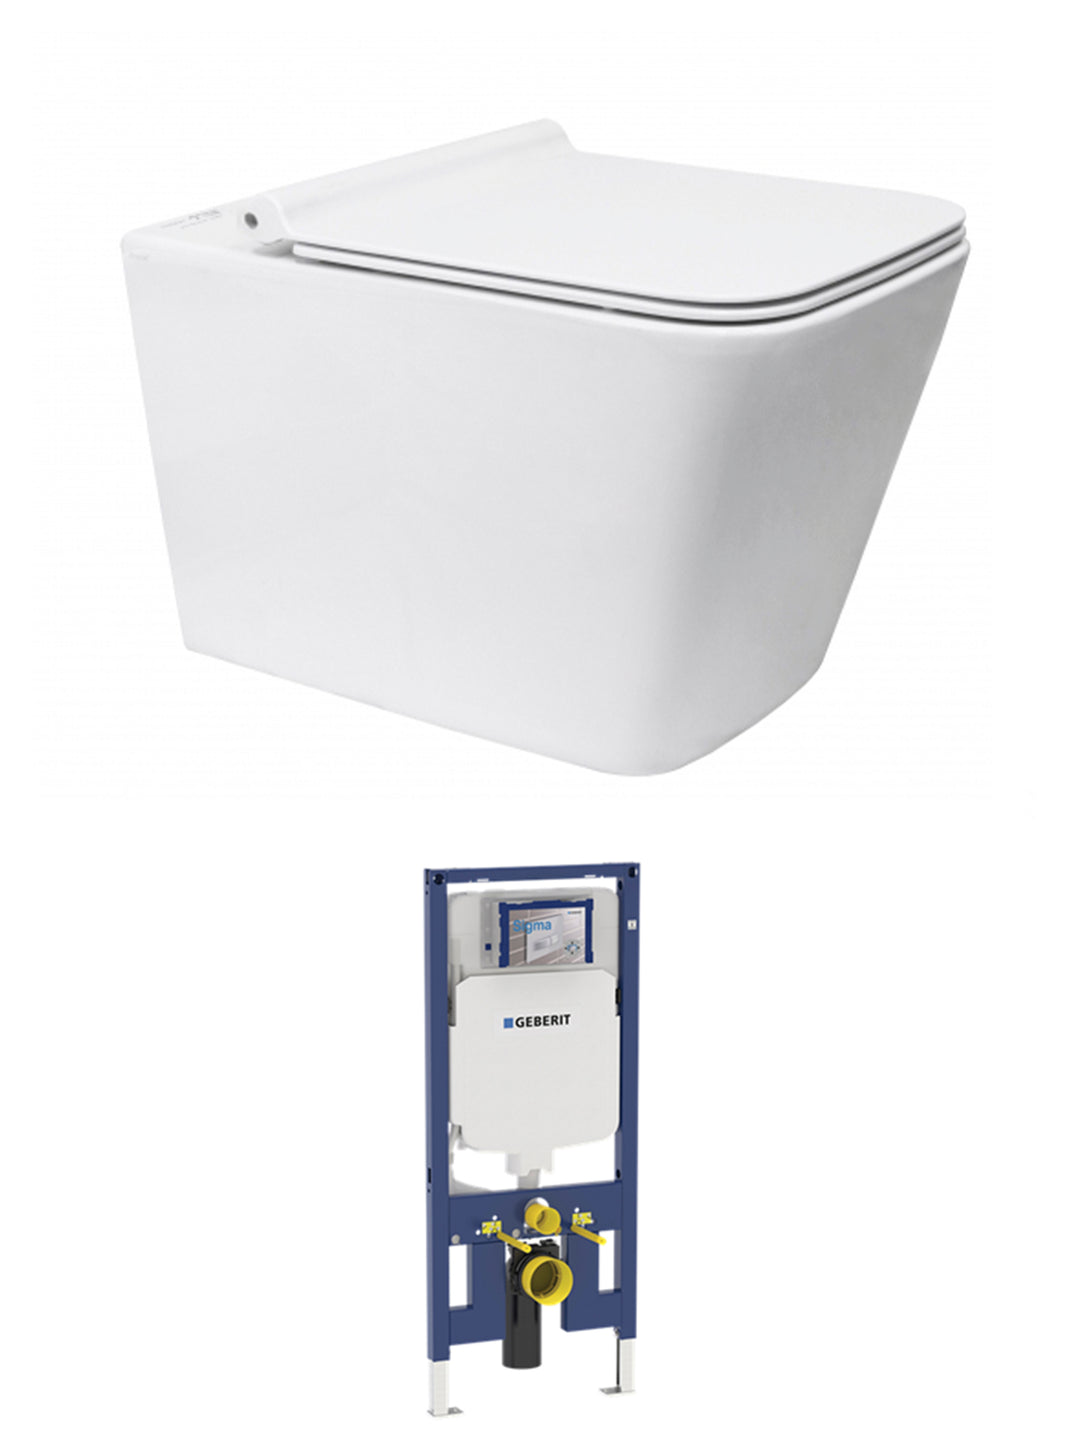 X-Cube Wall Hung Pan and Geberit Cistern (Button Order Separately) IXWHPPK-G-NP